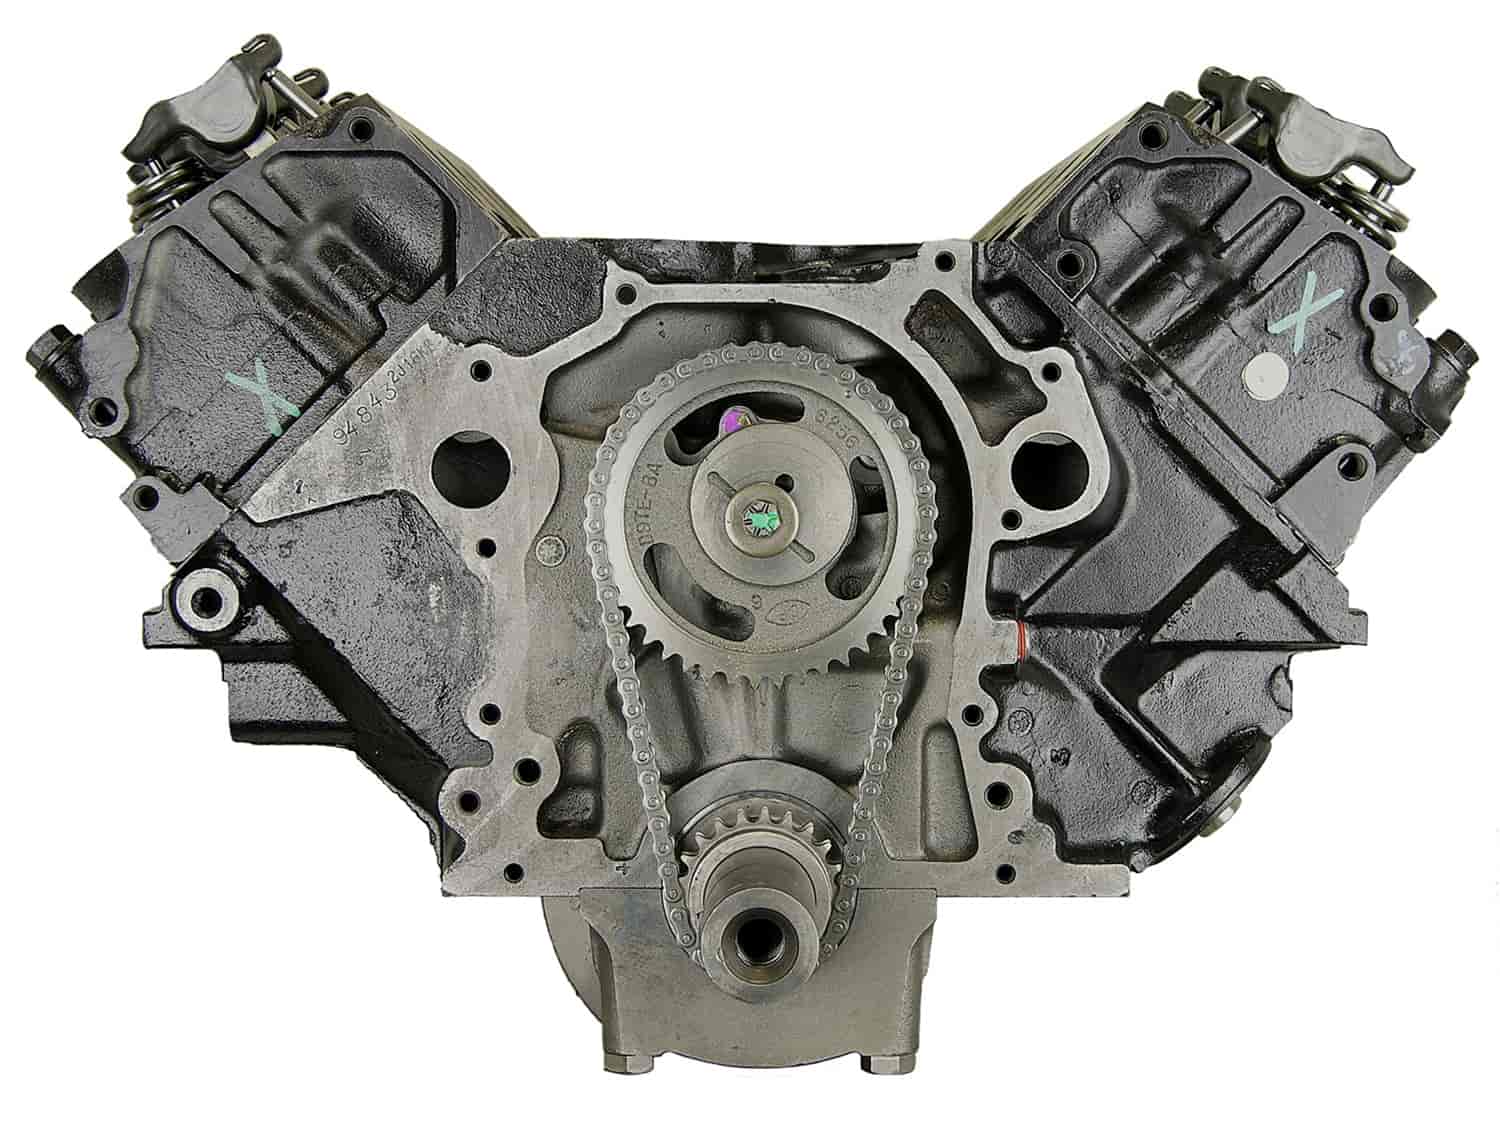 Remanufactured Crate Engine for 1997-1998 Ford Truck with 429ci/7.0L V8